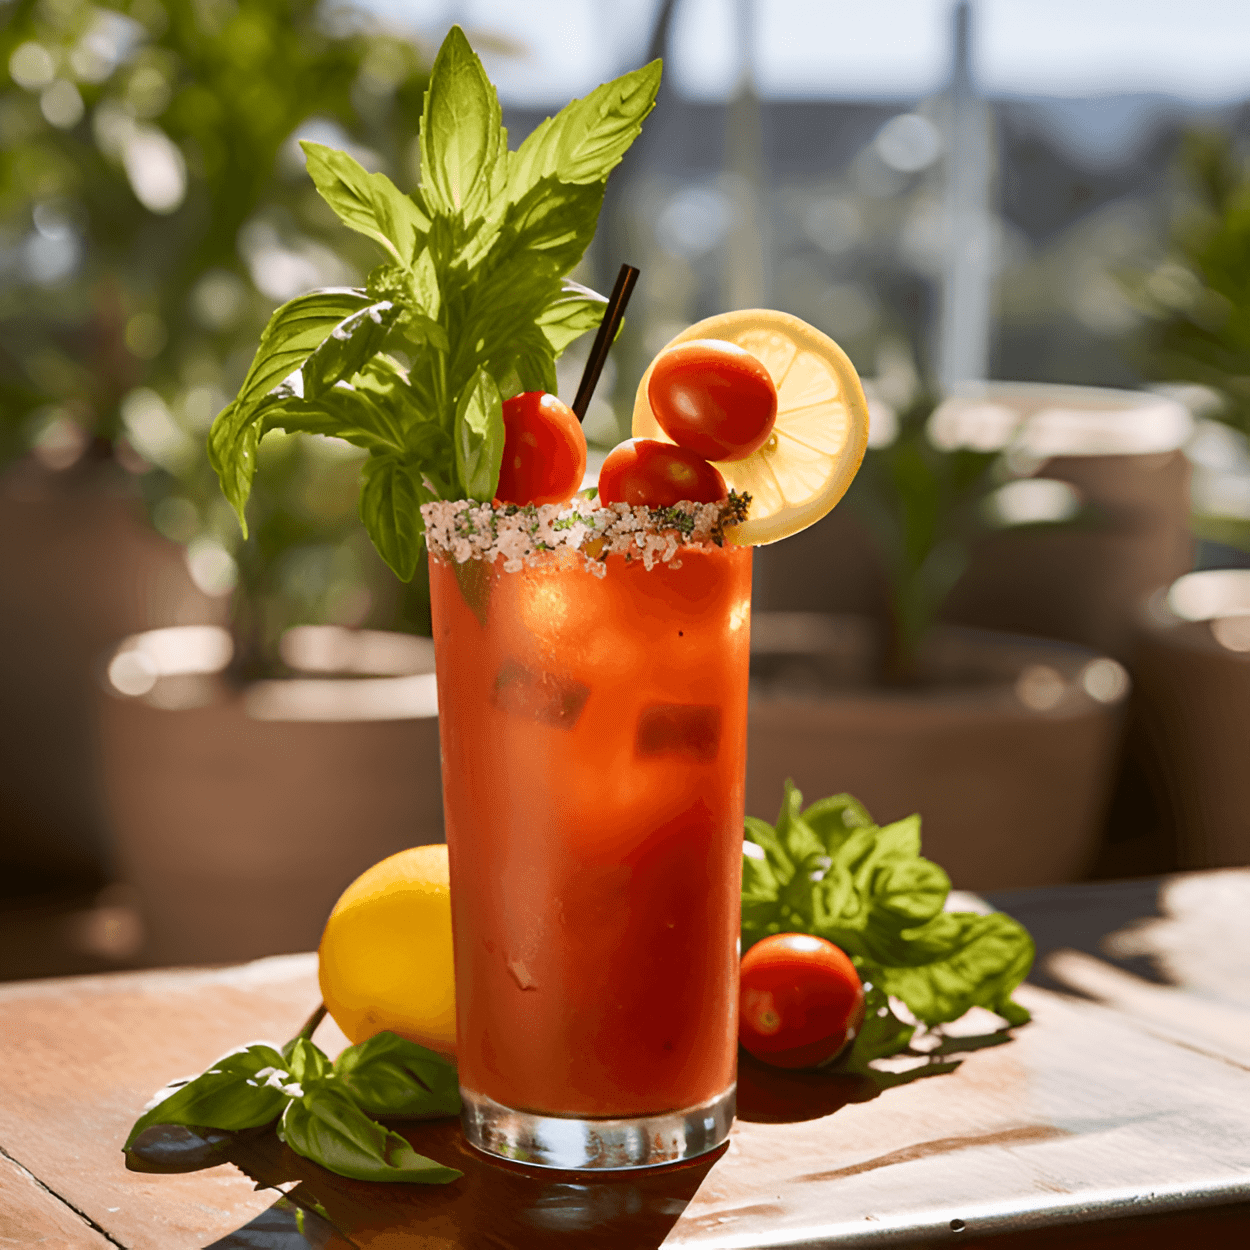 Caprese Bloody Mary Cocktail Recipe - The Caprese Bloody Mary is a savory, tangy, and slightly spicy cocktail. It has the freshness of tomatoes, the creaminess of mozzarella, and the earthiness of basil. The vodka gives it a strong kick, while the Worcestershire sauce and Tabasco add a complex depth of flavor.